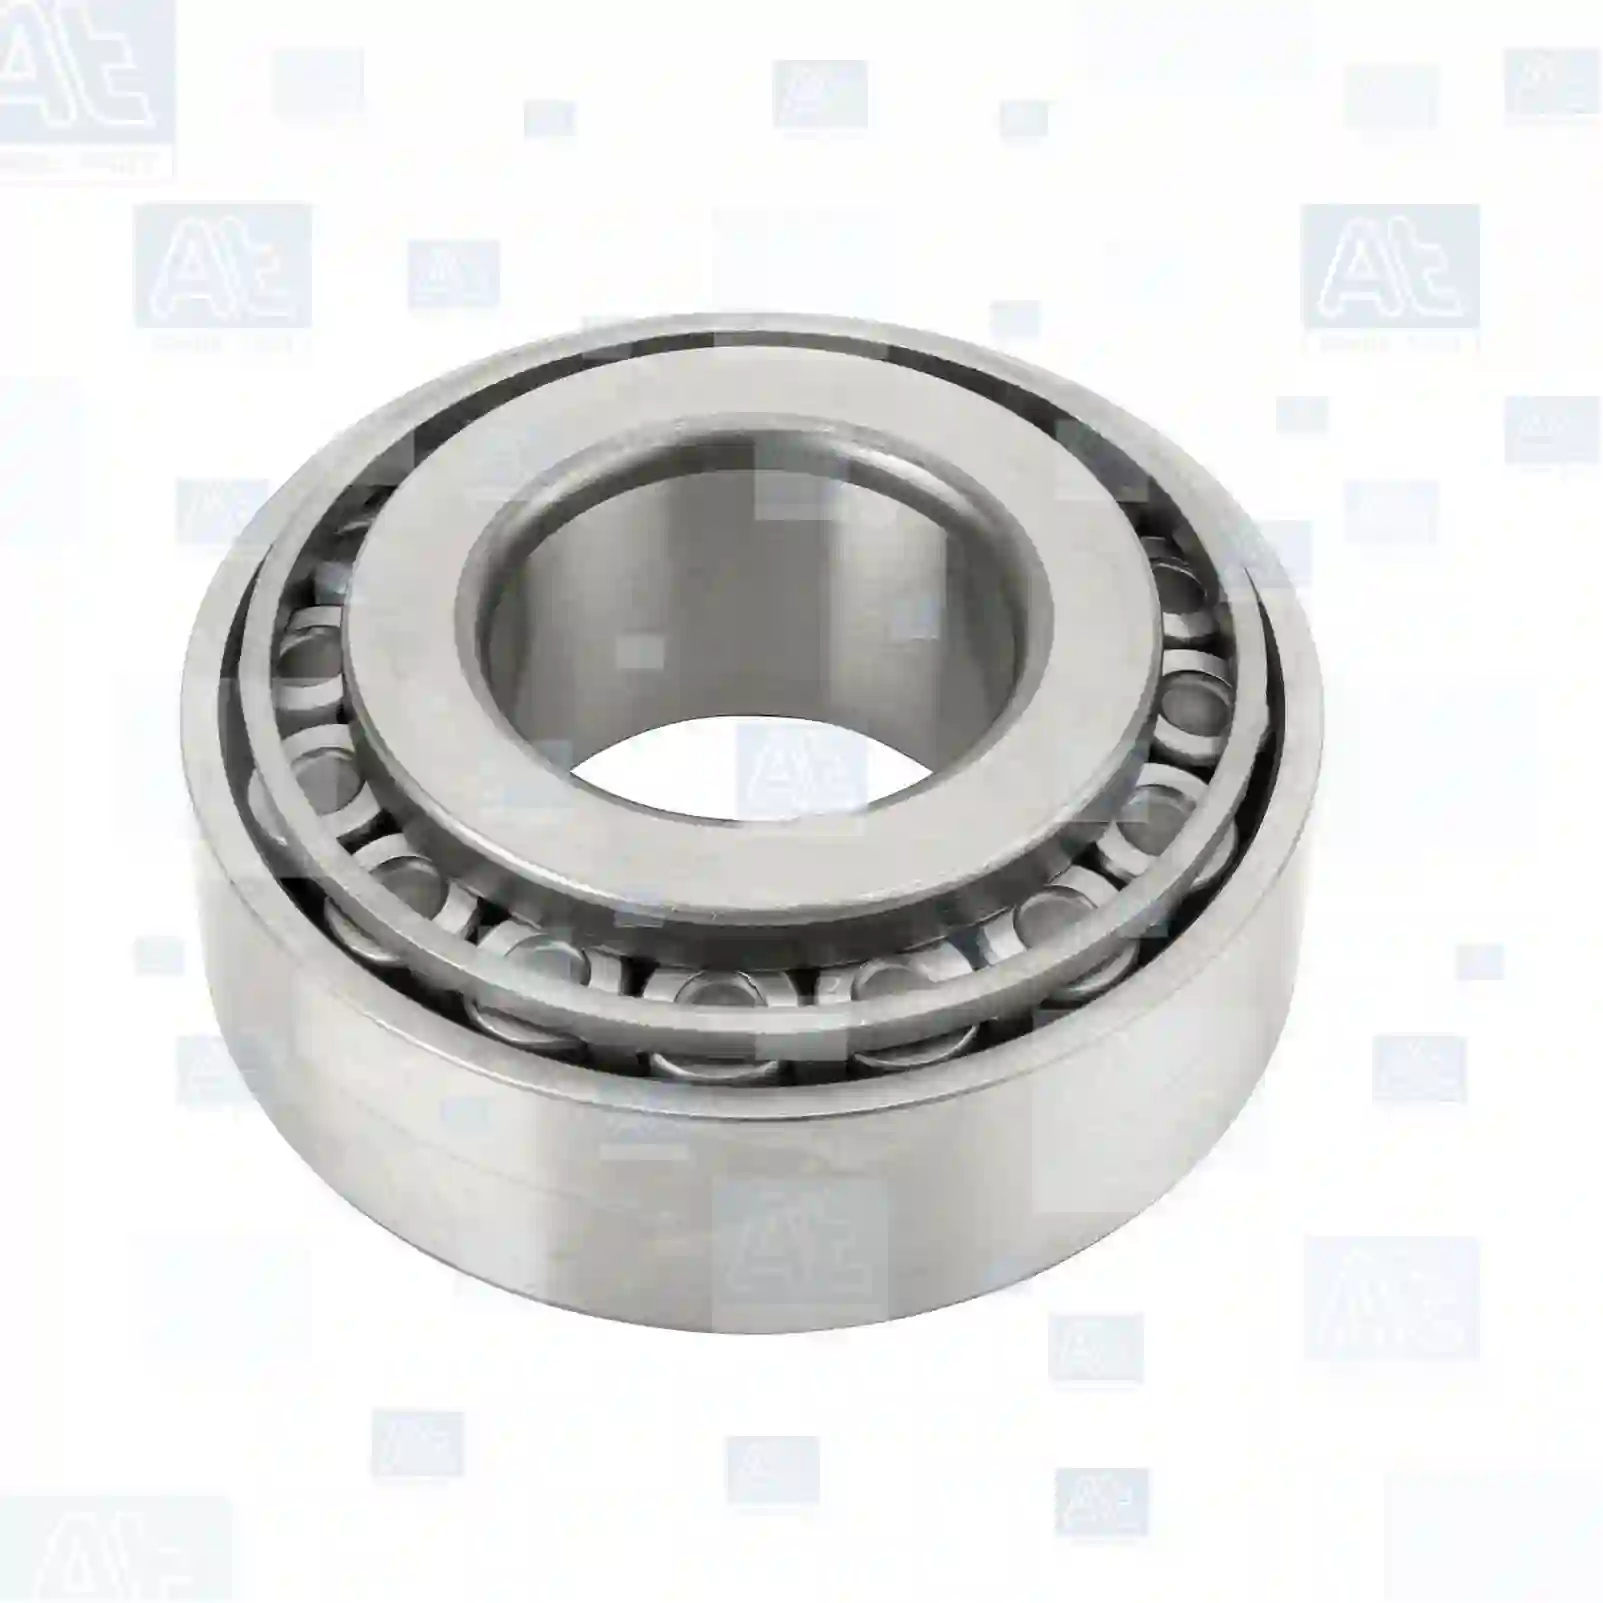 Tapered roller bearing, 77726312, 0264065000, 0264102500, 0556289, 0626875, 0626876, 1489090, 556289, 626875, 626876, 692180, 07982089, 26800600, 06324903200, 06324990016, 06324990034, 81440500074, 81934200131, 000720032310, 0019808202, 0019812905, 0019817405, 0019817605, 0019818202, 0019892905, 0069819905, 99041068, 99041068B, 14735, 6691169000, 11062, 183687, ZG03021-0008 ||  77726312 At Spare Part | Engine, Accelerator Pedal, Camshaft, Connecting Rod, Crankcase, Crankshaft, Cylinder Head, Engine Suspension Mountings, Exhaust Manifold, Exhaust Gas Recirculation, Filter Kits, Flywheel Housing, General Overhaul Kits, Engine, Intake Manifold, Oil Cleaner, Oil Cooler, Oil Filter, Oil Pump, Oil Sump, Piston & Liner, Sensor & Switch, Timing Case, Turbocharger, Cooling System, Belt Tensioner, Coolant Filter, Coolant Pipe, Corrosion Prevention Agent, Drive, Expansion Tank, Fan, Intercooler, Monitors & Gauges, Radiator, Thermostat, V-Belt / Timing belt, Water Pump, Fuel System, Electronical Injector Unit, Feed Pump, Fuel Filter, cpl., Fuel Gauge Sender,  Fuel Line, Fuel Pump, Fuel Tank, Injection Line Kit, Injection Pump, Exhaust System, Clutch & Pedal, Gearbox, Propeller Shaft, Axles, Brake System, Hubs & Wheels, Suspension, Leaf Spring, Universal Parts / Accessories, Steering, Electrical System, Cabin Tapered roller bearing, 77726312, 0264065000, 0264102500, 0556289, 0626875, 0626876, 1489090, 556289, 626875, 626876, 692180, 07982089, 26800600, 06324903200, 06324990016, 06324990034, 81440500074, 81934200131, 000720032310, 0019808202, 0019812905, 0019817405, 0019817605, 0019818202, 0019892905, 0069819905, 99041068, 99041068B, 14735, 6691169000, 11062, 183687, ZG03021-0008 ||  77726312 At Spare Part | Engine, Accelerator Pedal, Camshaft, Connecting Rod, Crankcase, Crankshaft, Cylinder Head, Engine Suspension Mountings, Exhaust Manifold, Exhaust Gas Recirculation, Filter Kits, Flywheel Housing, General Overhaul Kits, Engine, Intake Manifold, Oil Cleaner, Oil Cooler, Oil Filter, Oil Pump, Oil Sump, Piston & Liner, Sensor & Switch, Timing Case, Turbocharger, Cooling System, Belt Tensioner, Coolant Filter, Coolant Pipe, Corrosion Prevention Agent, Drive, Expansion Tank, Fan, Intercooler, Monitors & Gauges, Radiator, Thermostat, V-Belt / Timing belt, Water Pump, Fuel System, Electronical Injector Unit, Feed Pump, Fuel Filter, cpl., Fuel Gauge Sender,  Fuel Line, Fuel Pump, Fuel Tank, Injection Line Kit, Injection Pump, Exhaust System, Clutch & Pedal, Gearbox, Propeller Shaft, Axles, Brake System, Hubs & Wheels, Suspension, Leaf Spring, Universal Parts / Accessories, Steering, Electrical System, Cabin